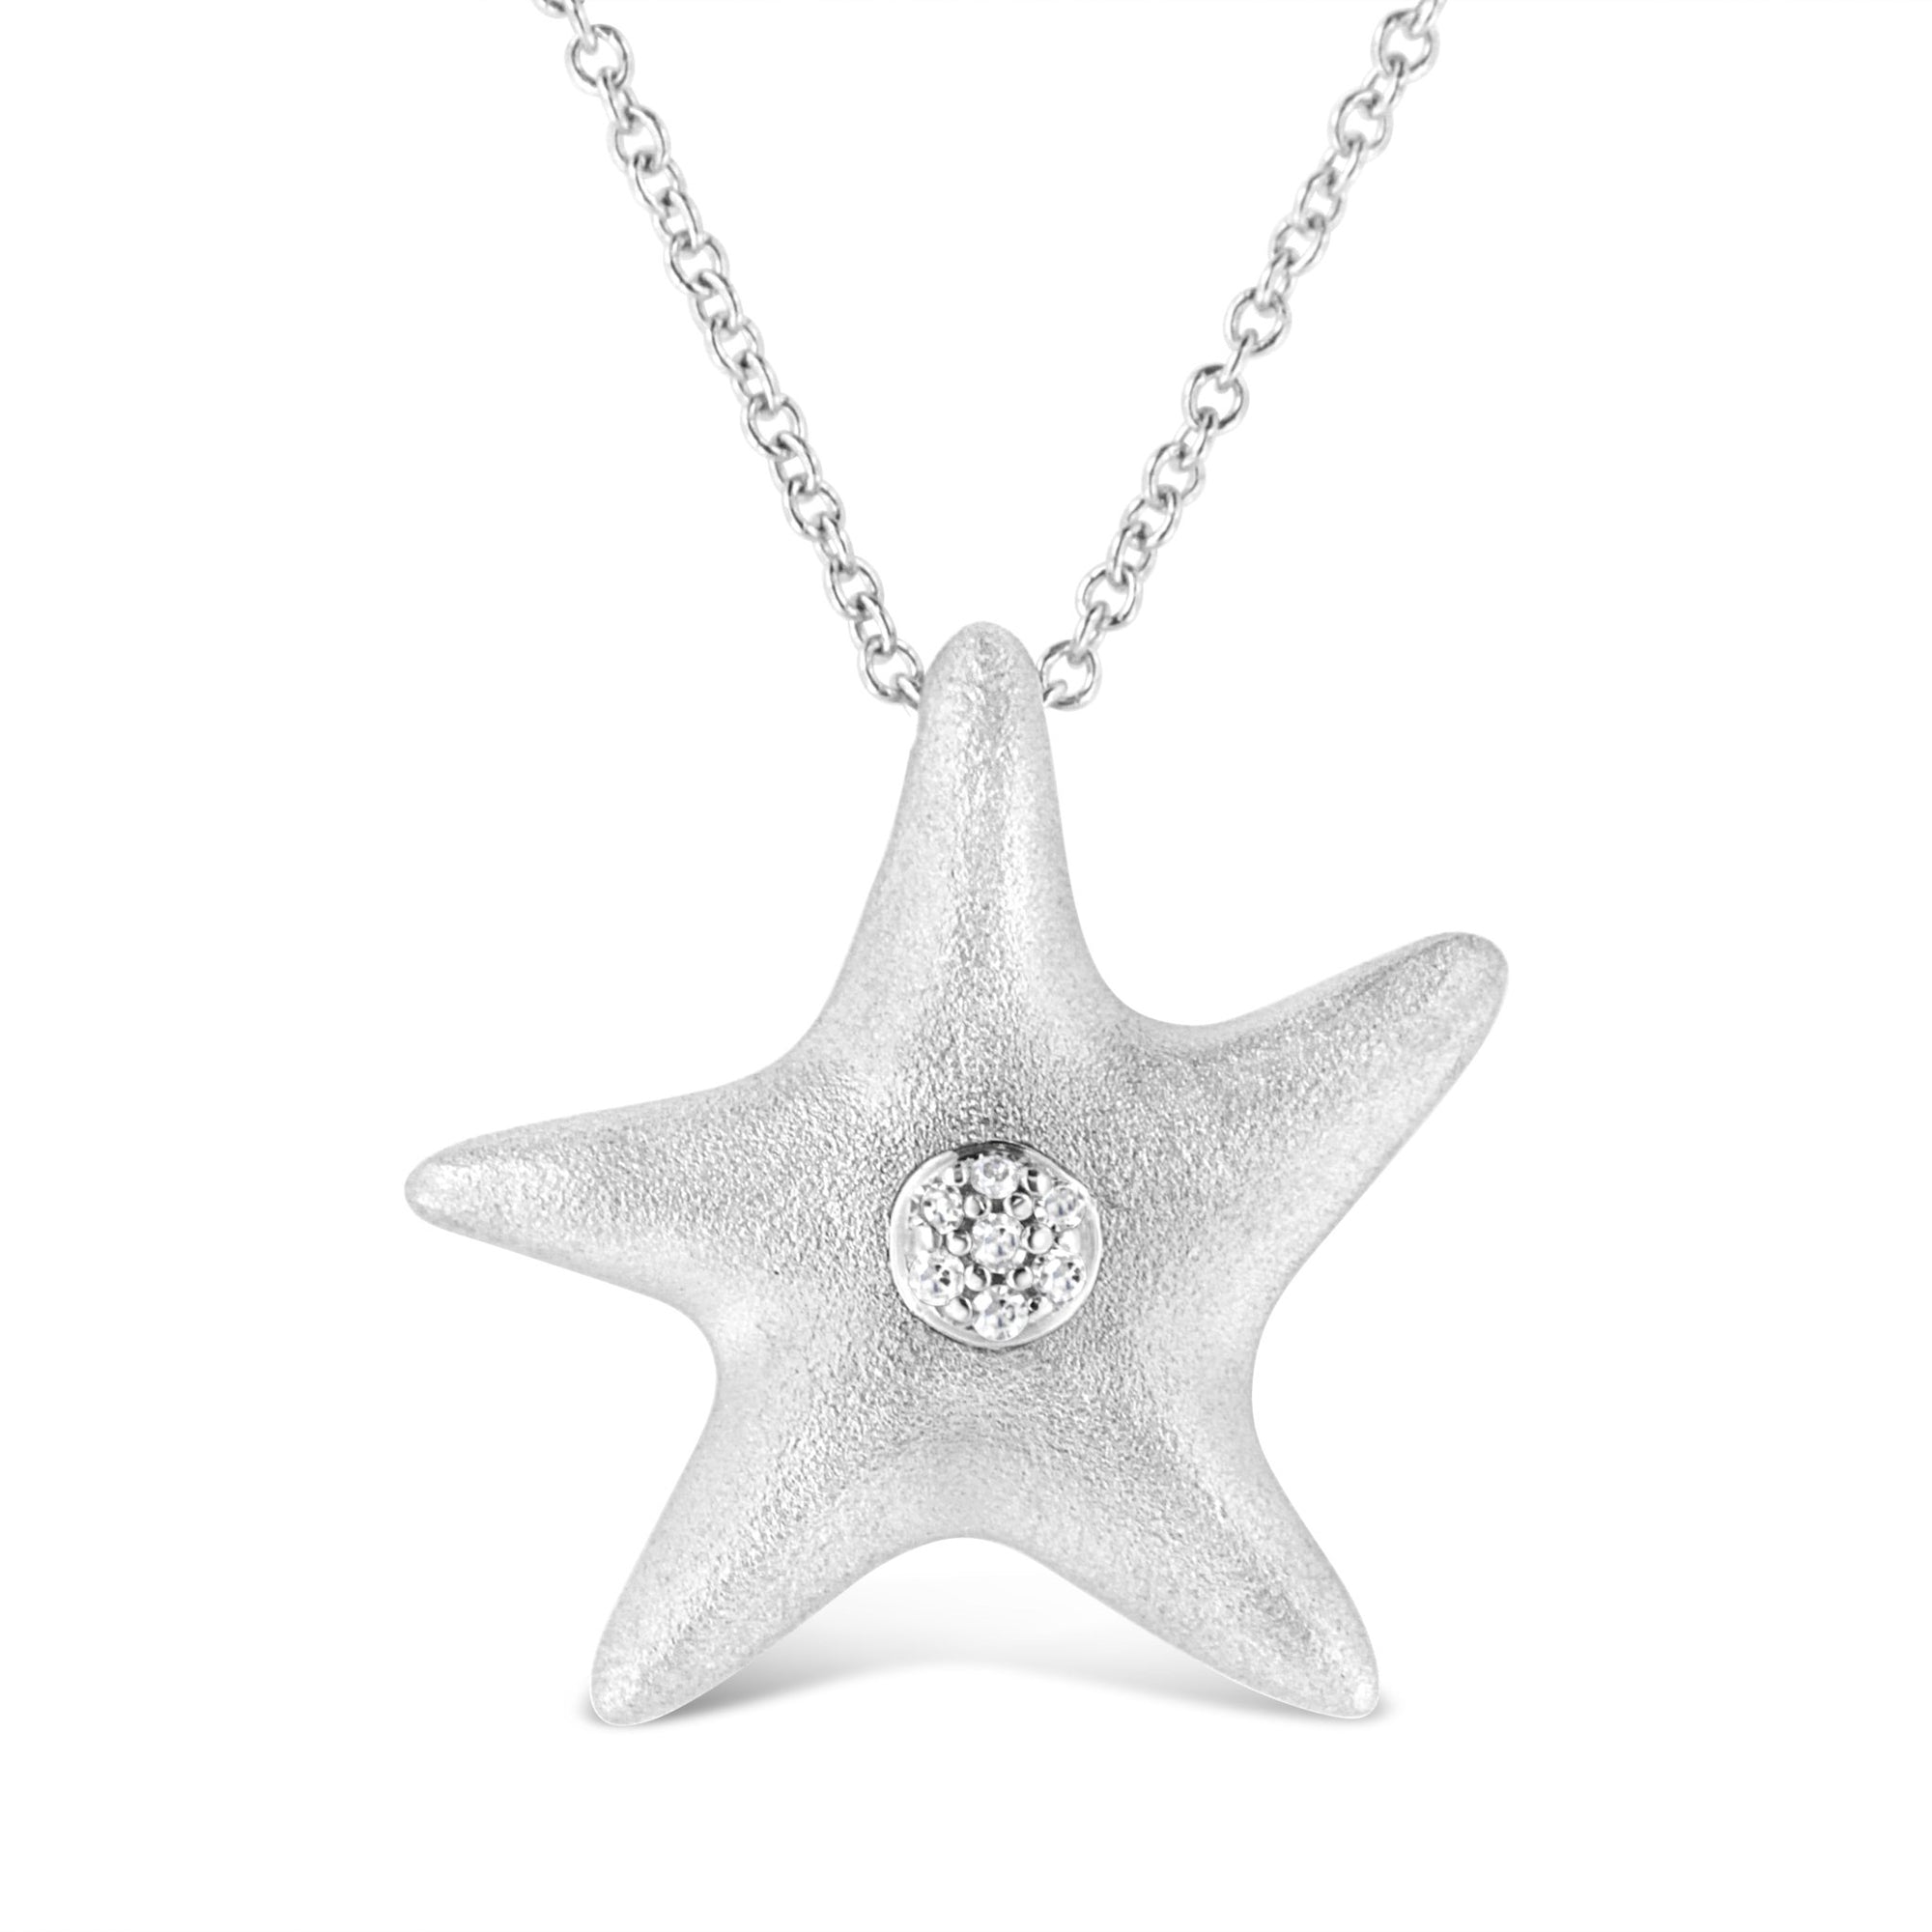 .925 Sterling Silver Prong-Set Diamond Accent Starfish Pendant Necklace (I-J Color, I1-I2 Clarity) - Size 18" - LinkagejewelrydesignLinkagejewelrydesign